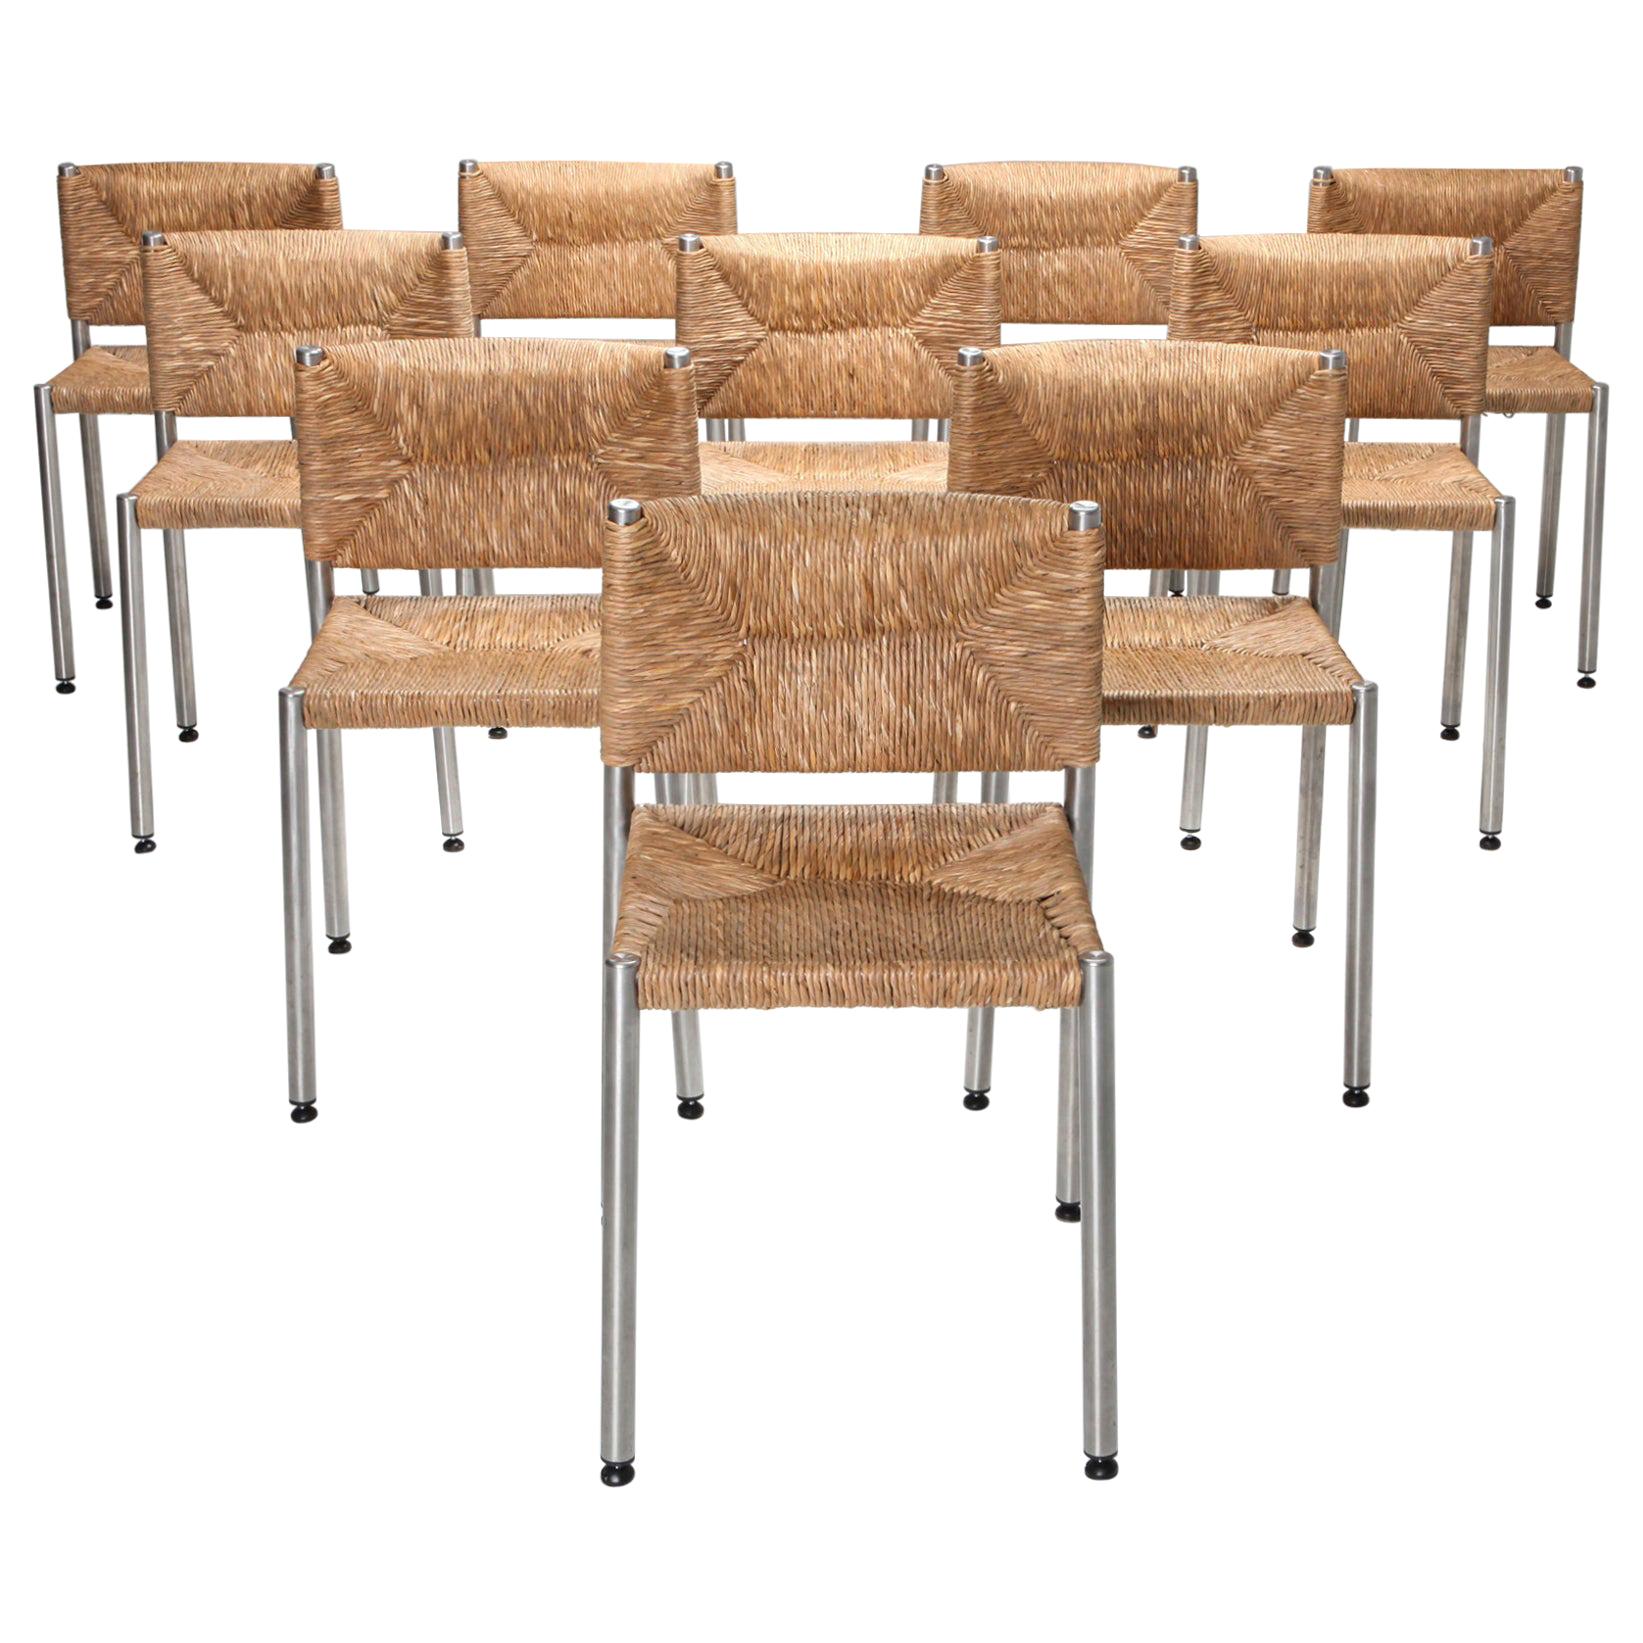 Contemporary Rustic Modern Chairs in Seagrass and Aluminum